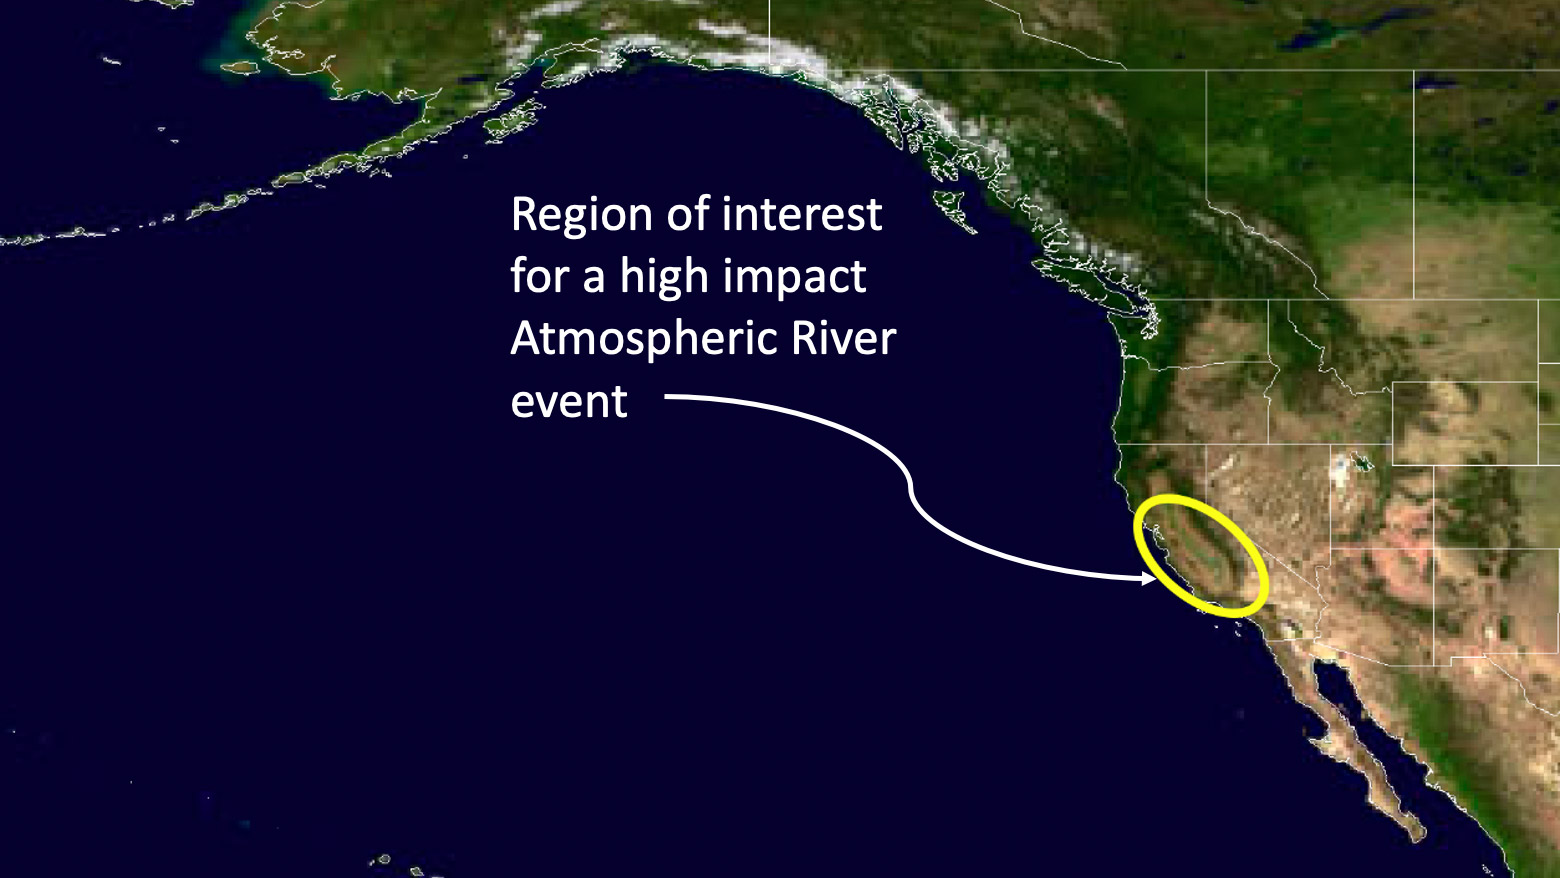 Atmospheric River delivers heavy rain and high winds in California